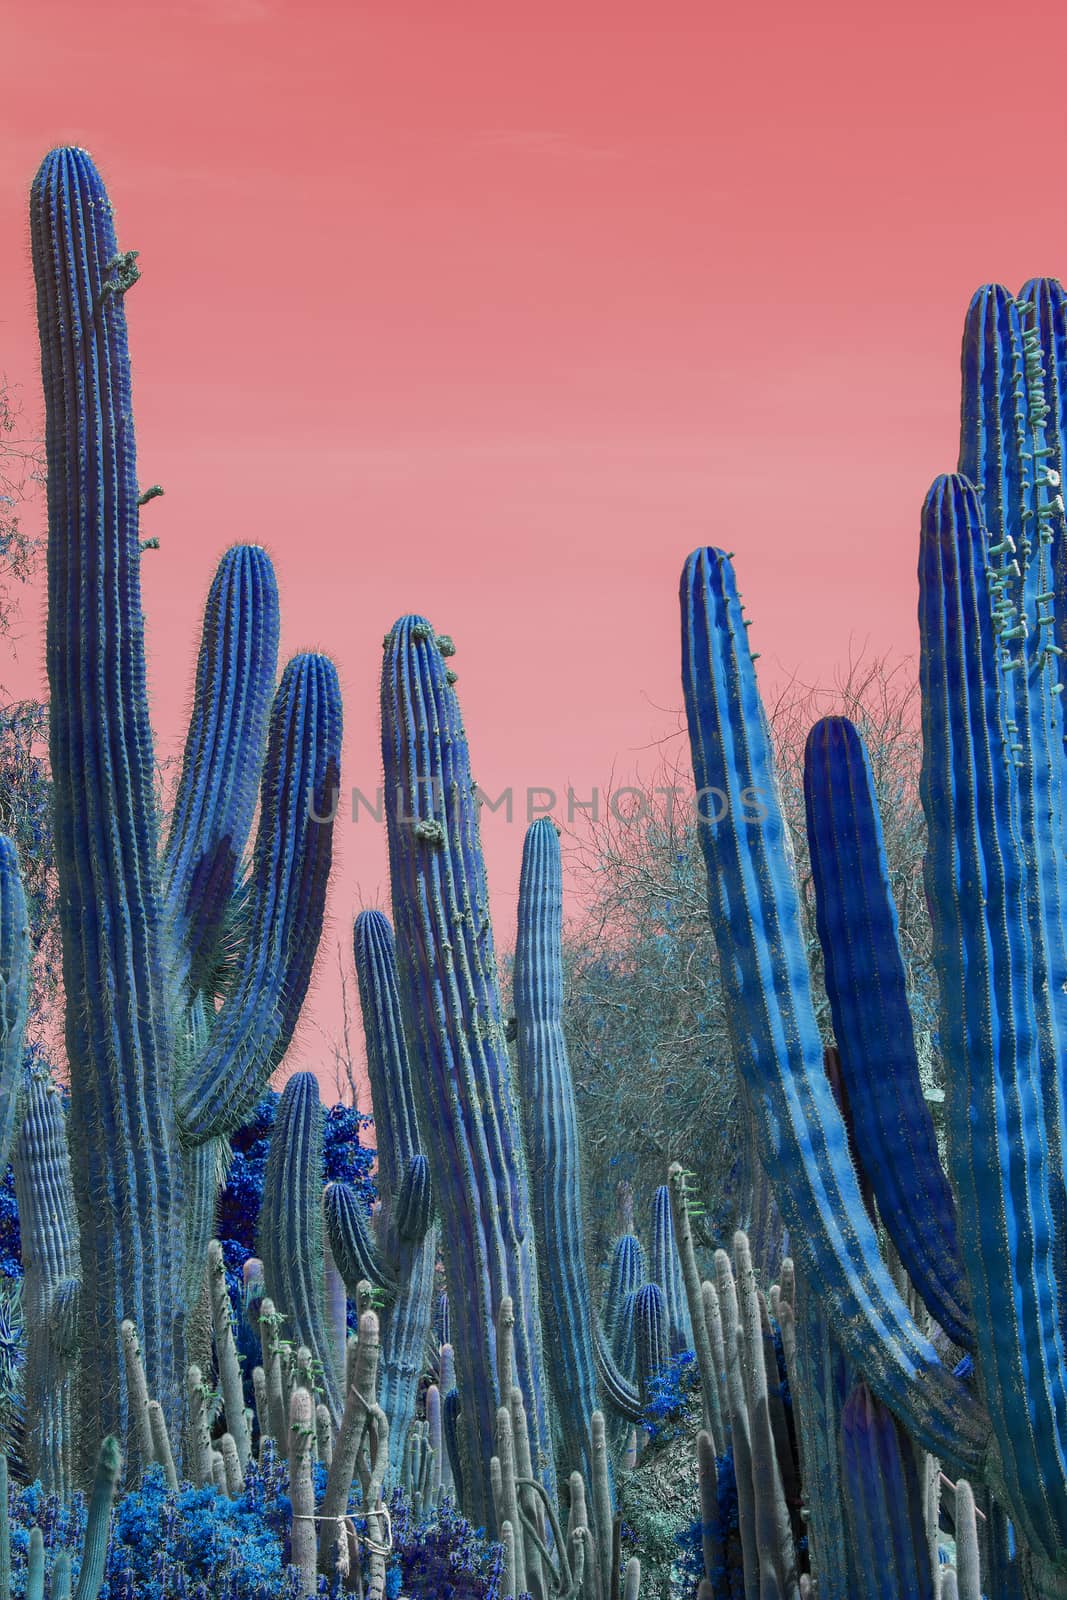 Surrealistic abstract blue glow thorny cactus in arid landscape with red sky